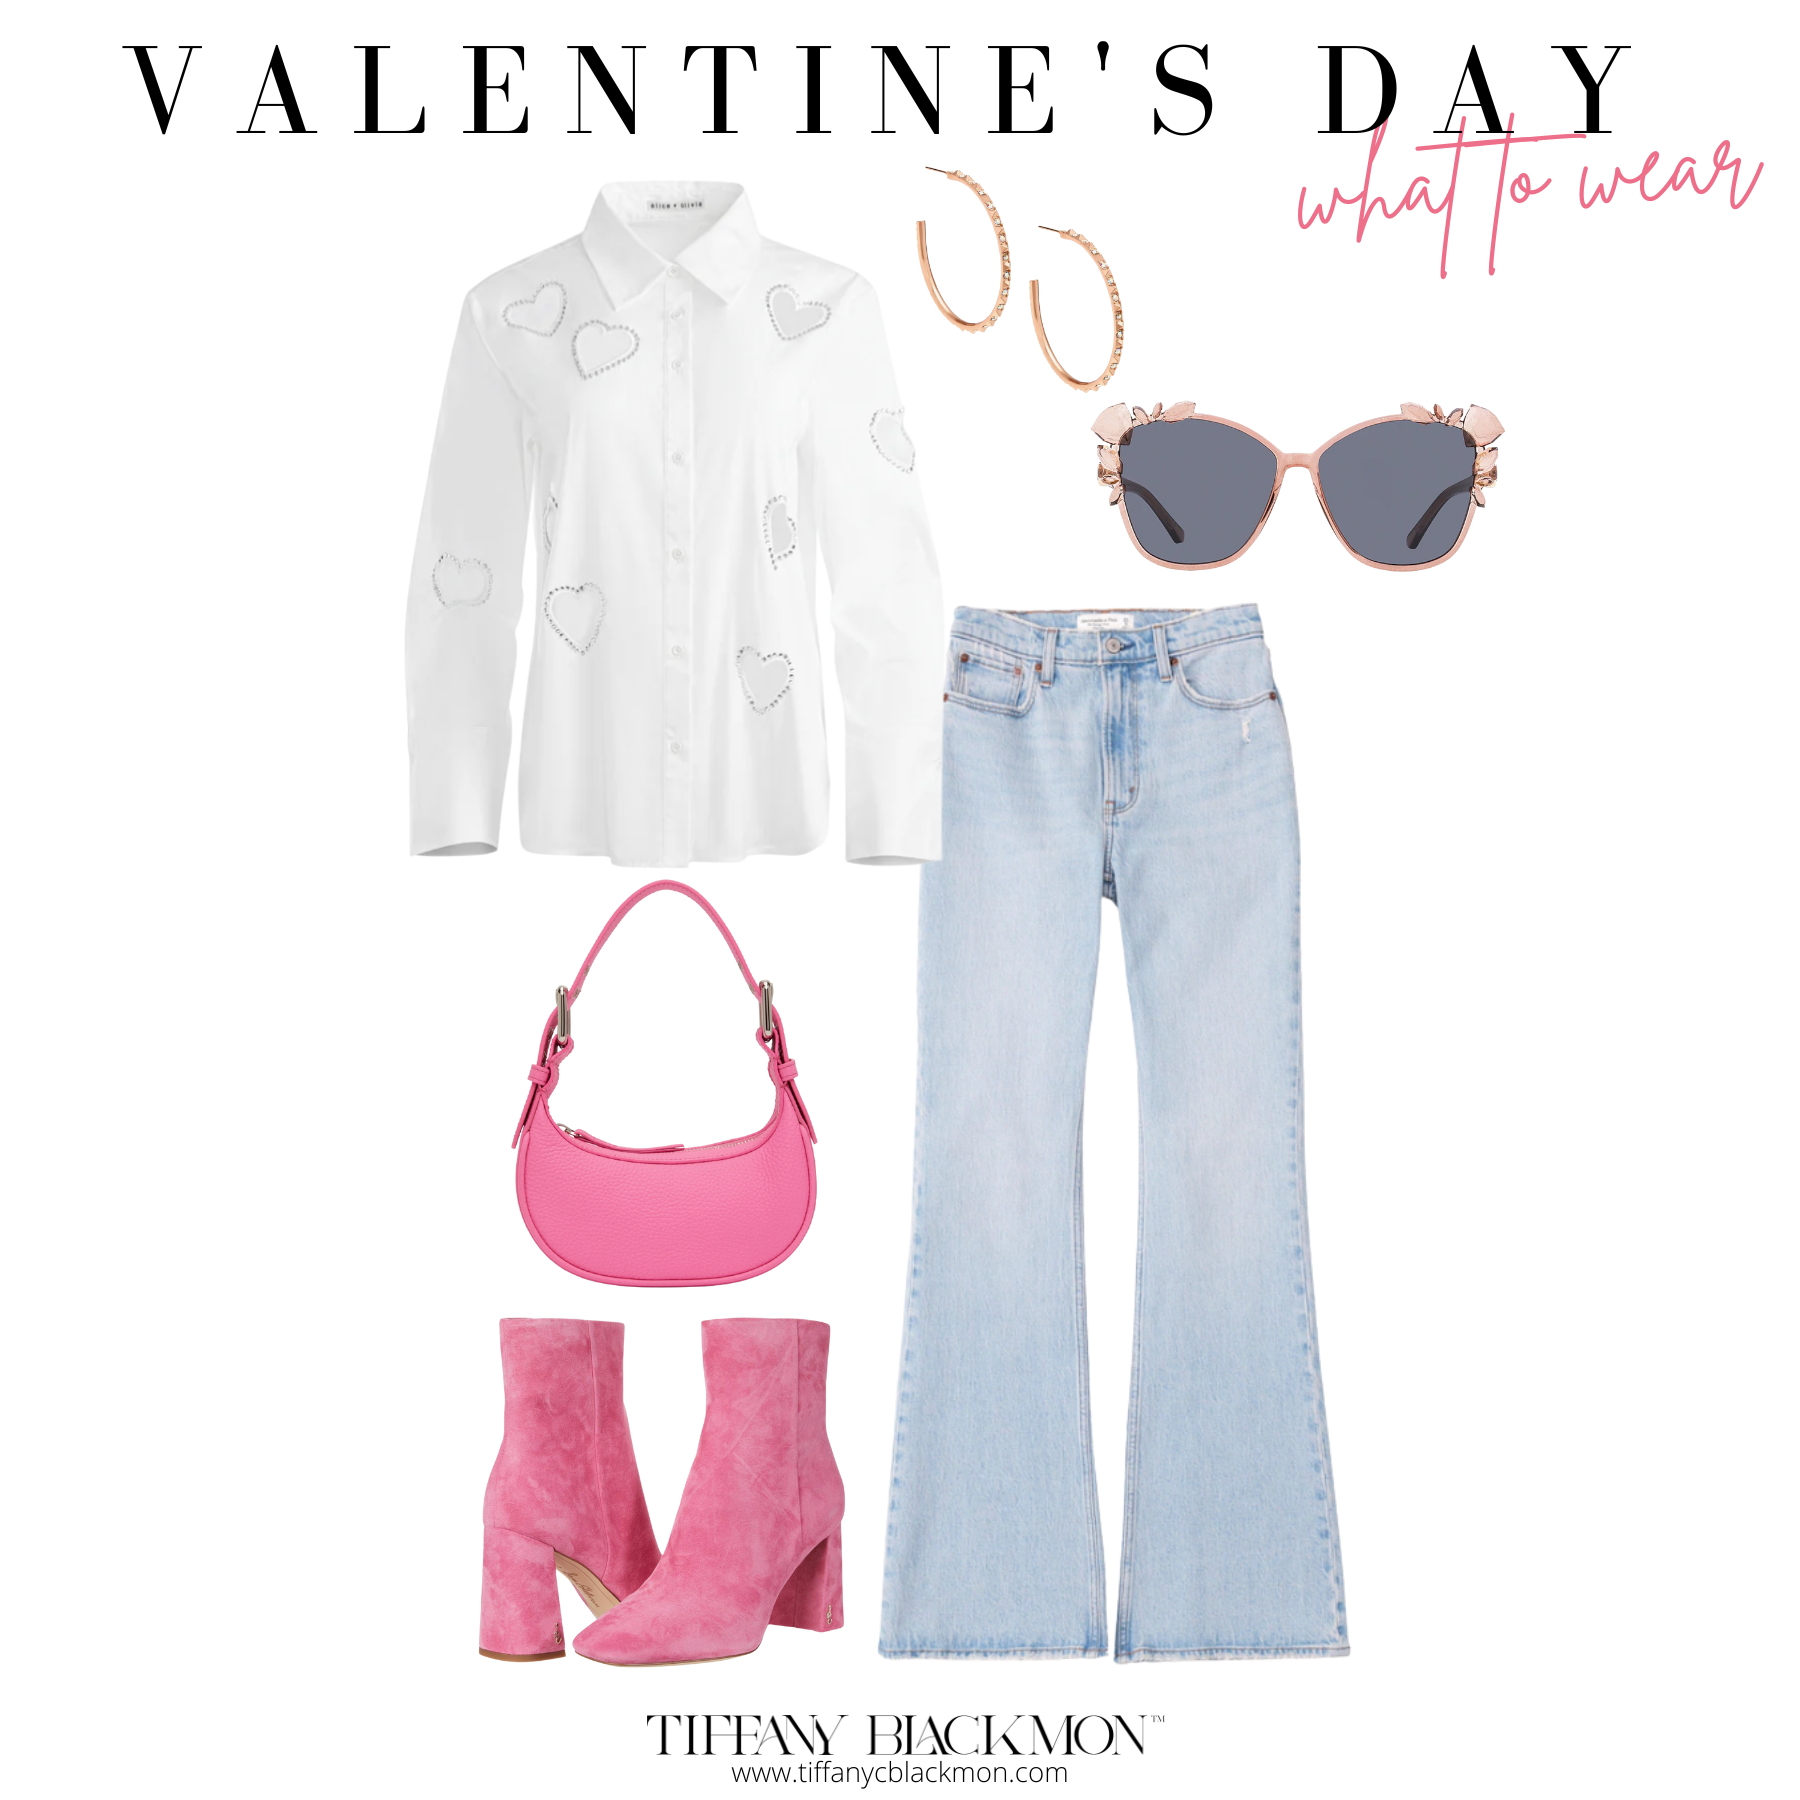 Valentine's Day: What to Wear
#buttondown #blouse #hearts #jeans #denim #earrings #sunglasses #purse #hoops